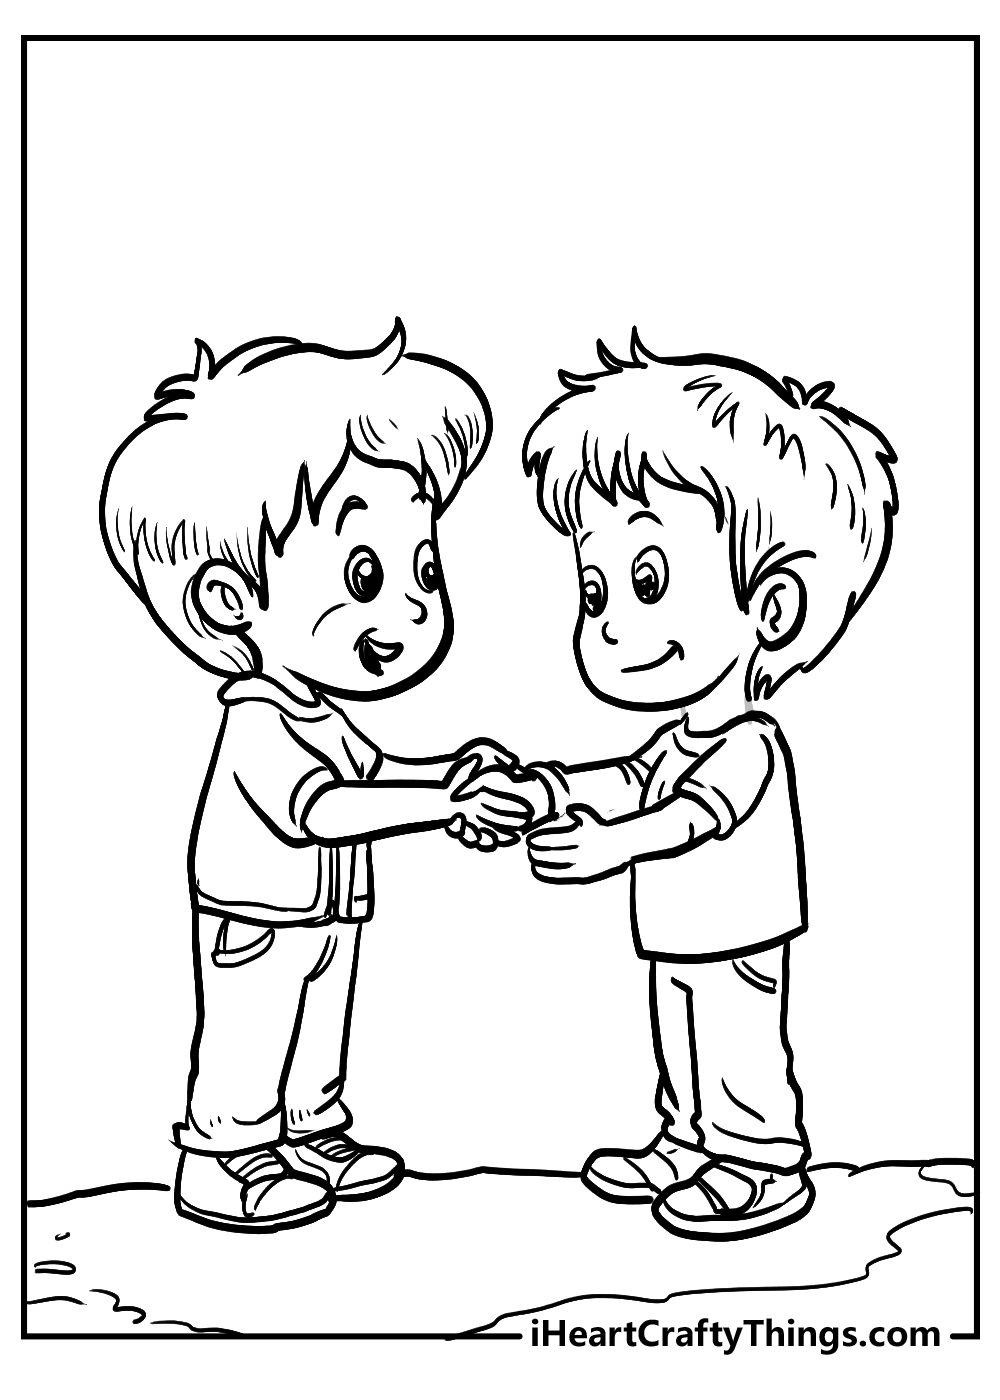 kind people coloring pages